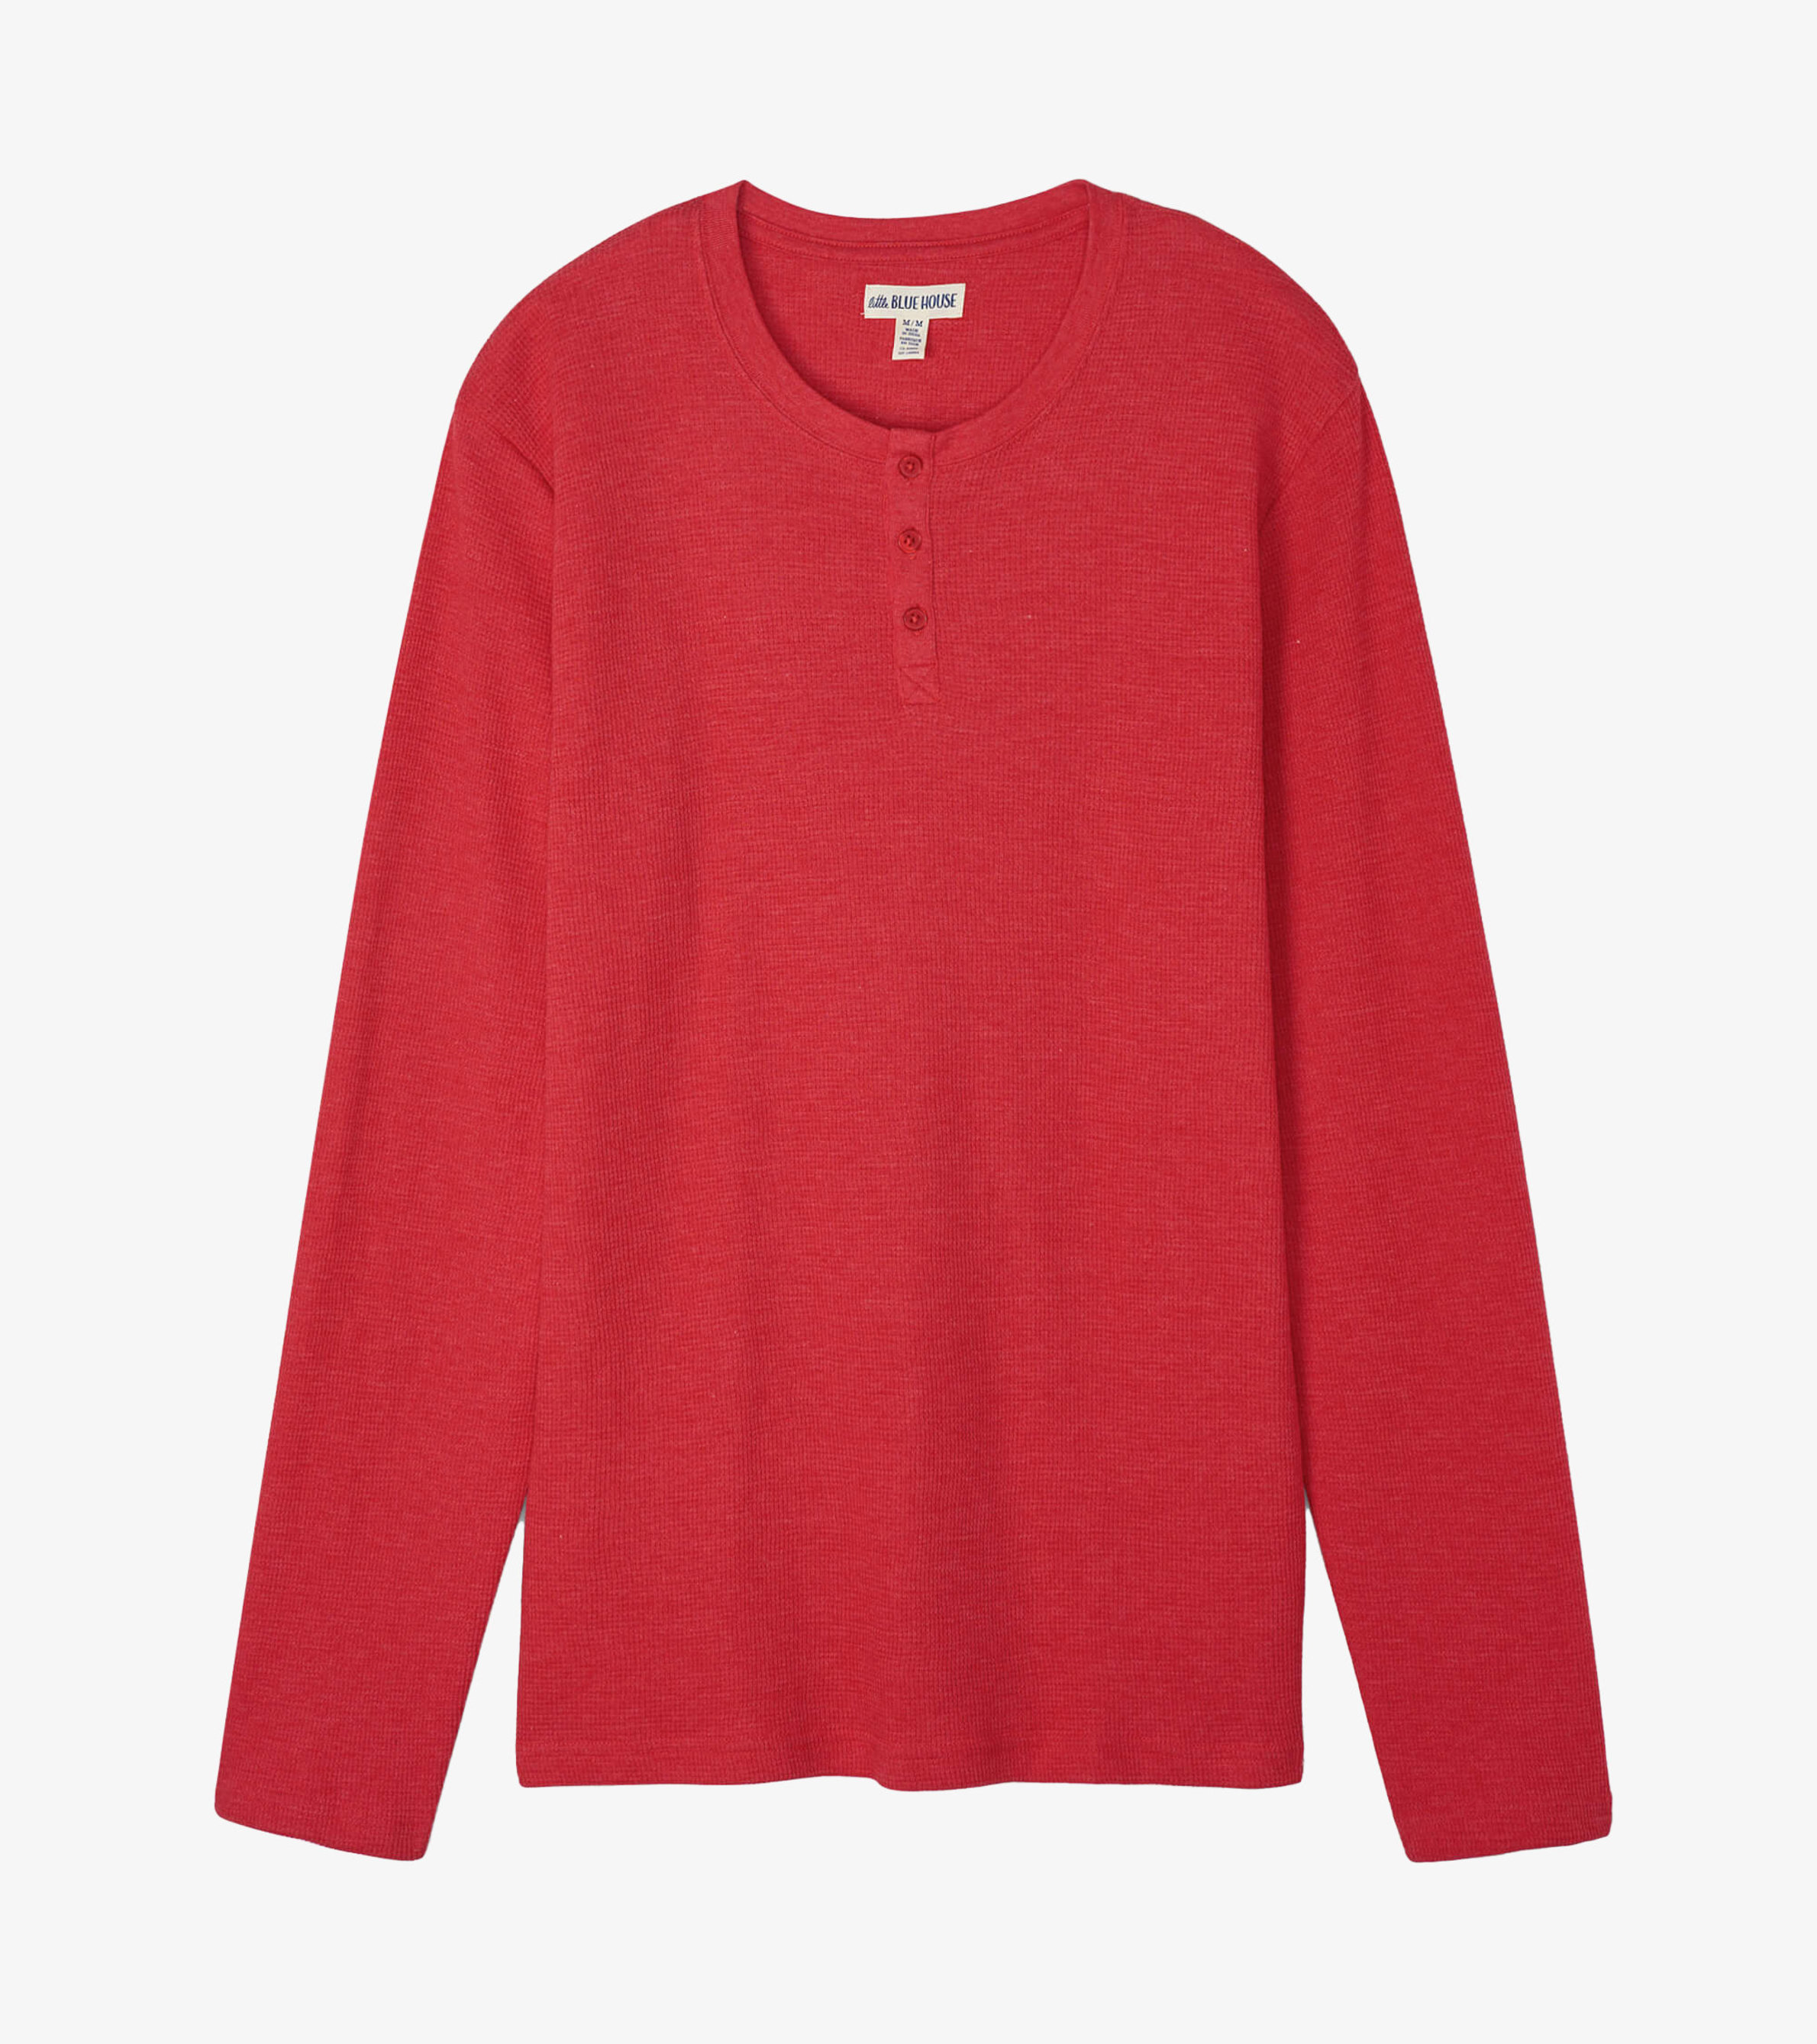 https://cdn.littlebluehouse.com/product_images/holiday-red-mens-waffle-henley/TSUORNA001_A_jpg/pdp_zoom.jpg?c=1694202284&locale=us_en